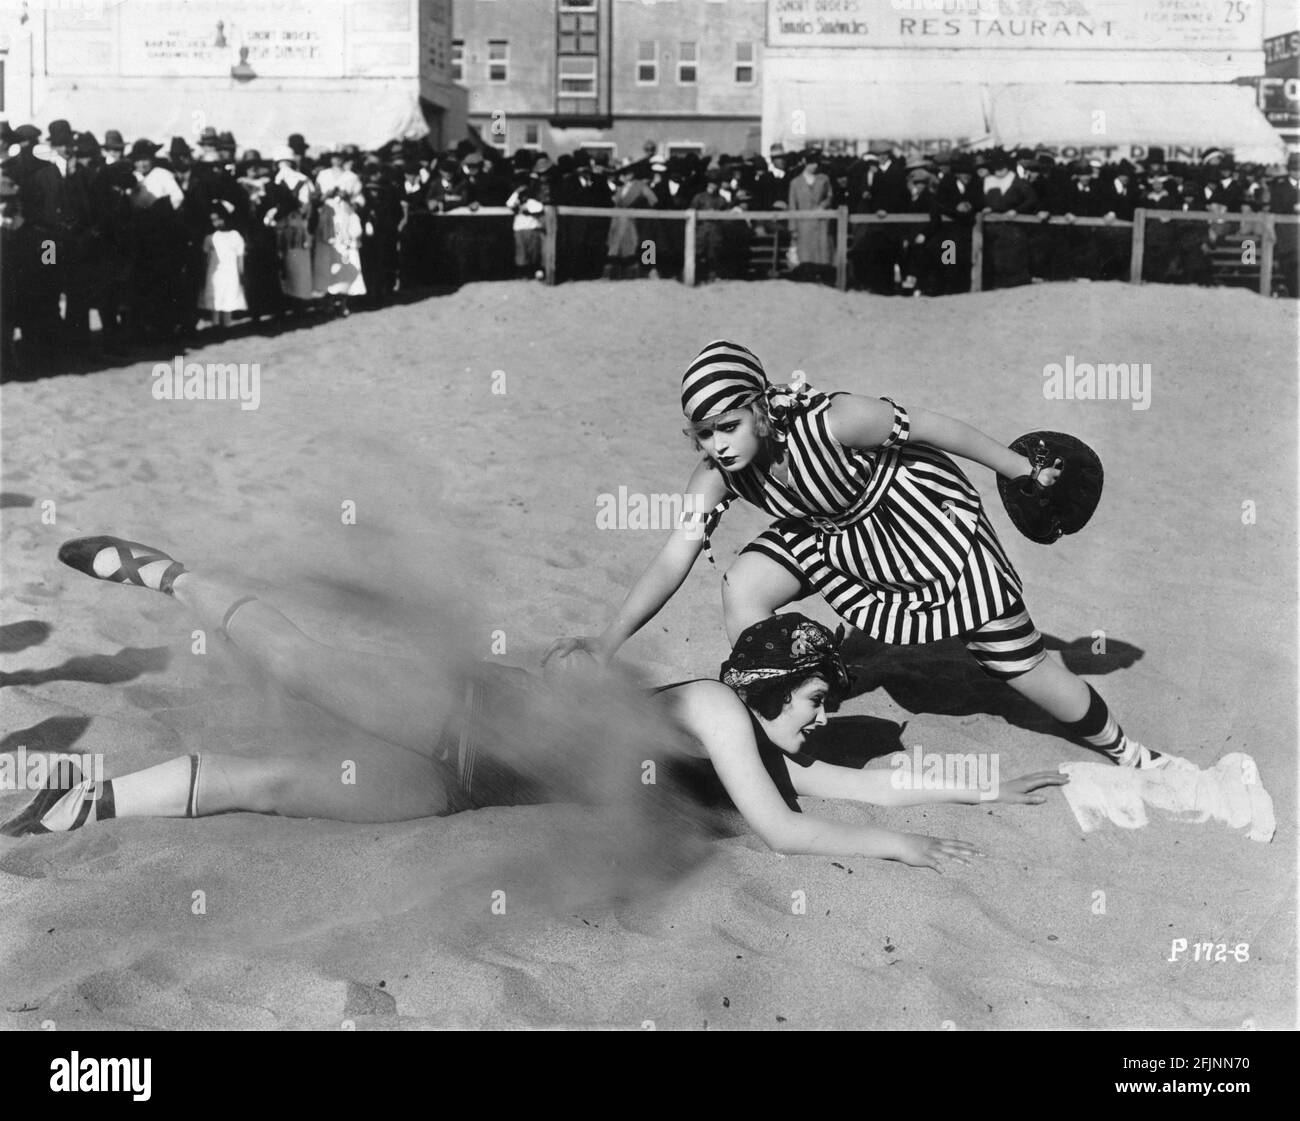 MACK SENNETT'S BATHING BEAUTIES MARY THURMAN and PHYLLIS HAVER circa 1917 playing baseball on the sand at Venice Beach California while large audience watches them during promotional appearance for Mack Sennett Comedies distributed by Paramount Pictures Stock Photo